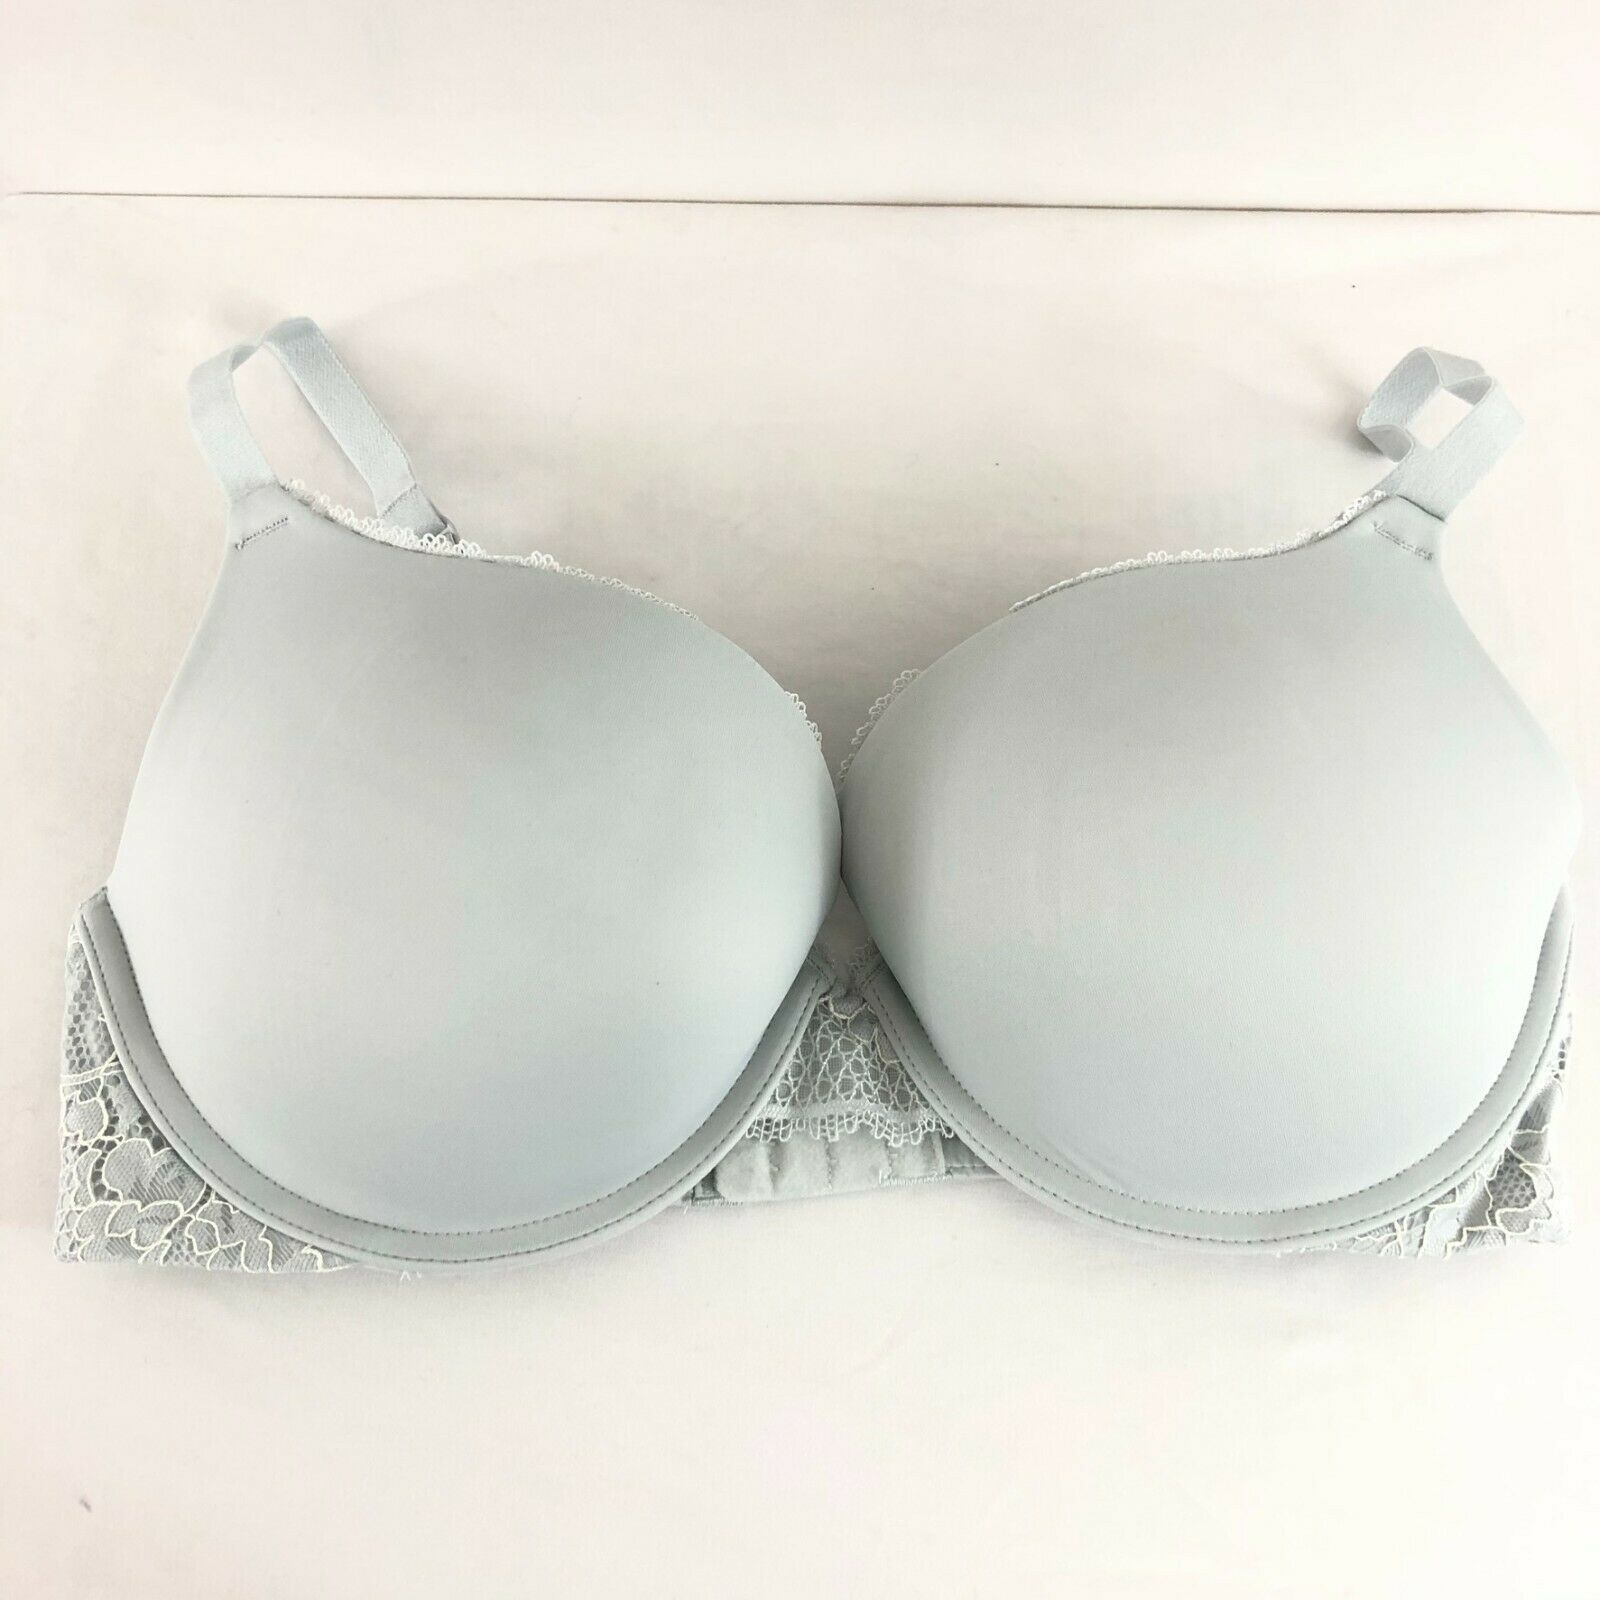 Primary image for Auden Bra The Radiant Plunge Push-Up Lace Trim Gray 34D